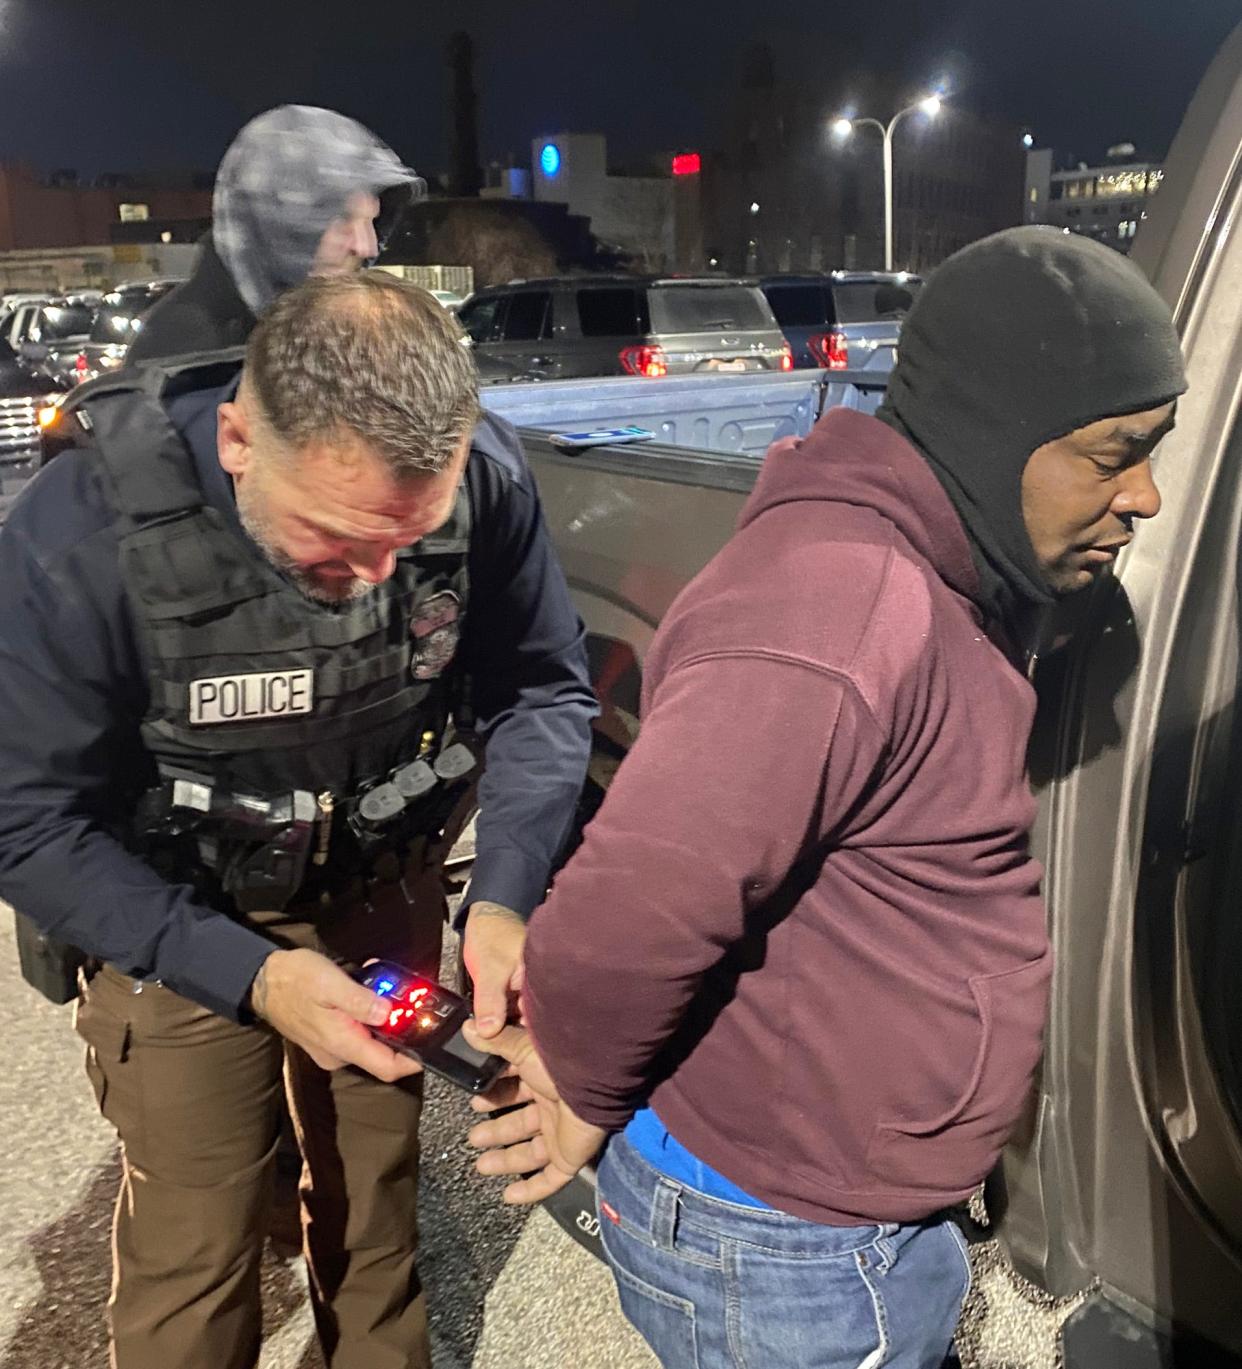 U.S. Immigration and Customs Enforcement officers arrest Jaconias Rosa Pereira in Worcester Wednesday. Pereira is a Brazilian criminal fugitive wanted for murder in Brazil.